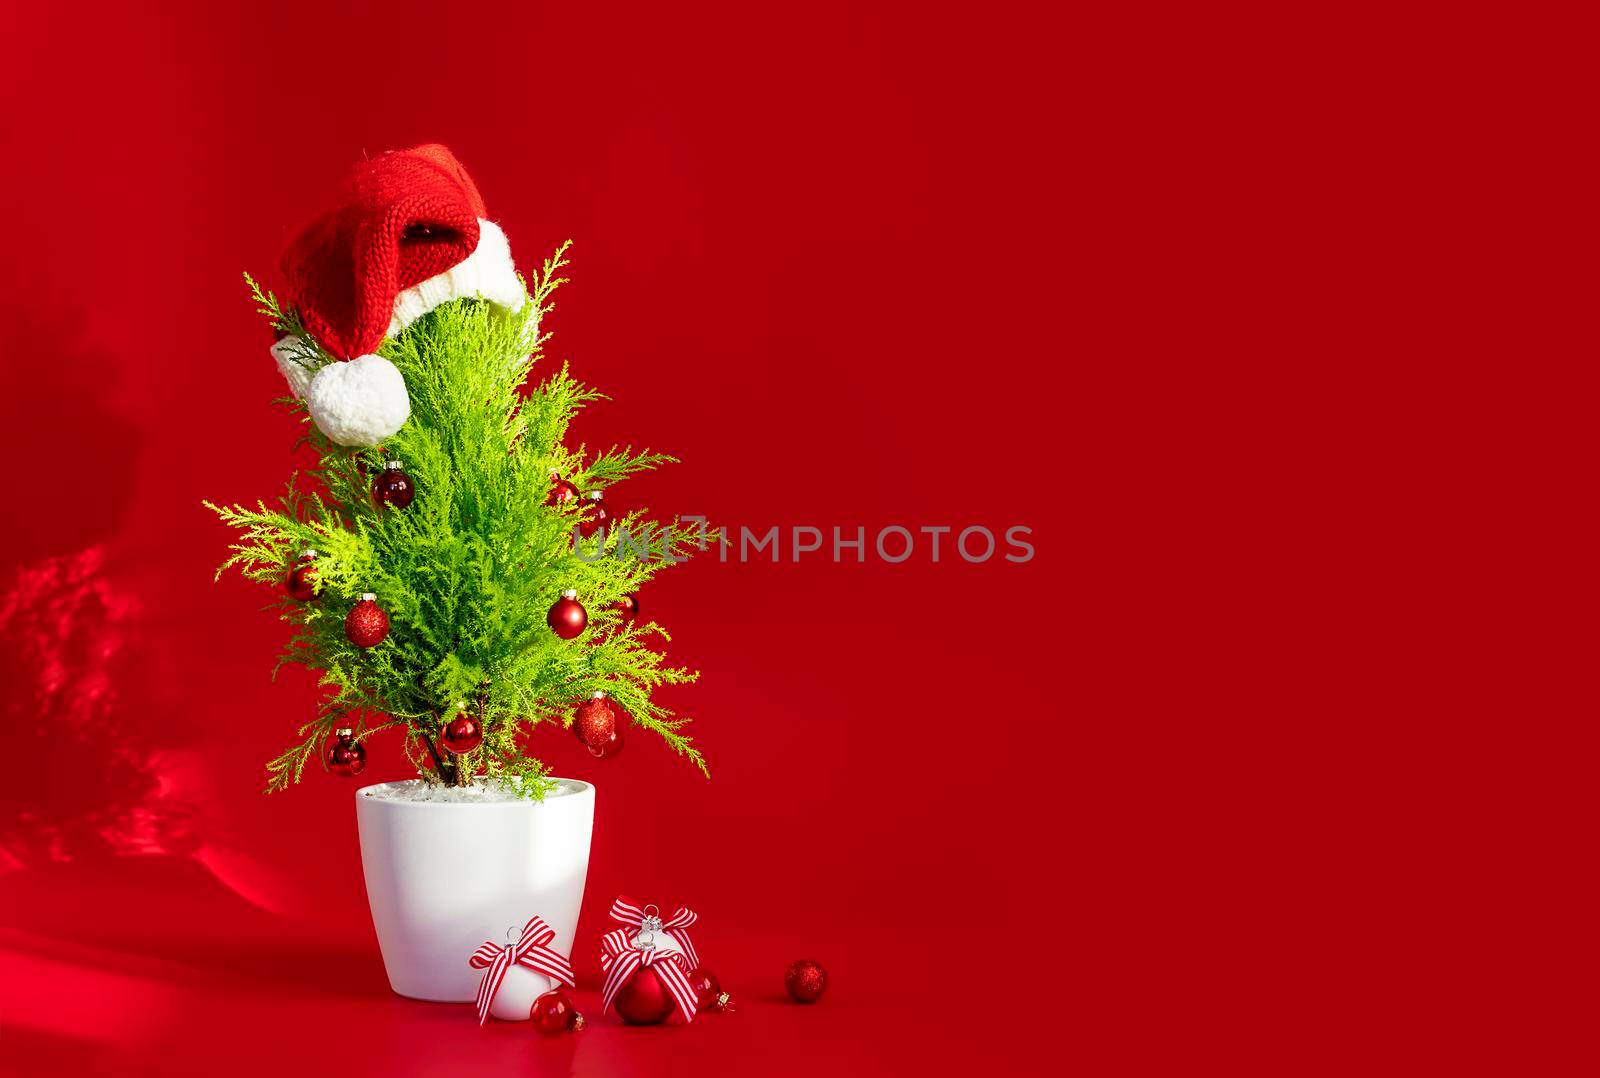 Christmas tree and decorations on a red background with copy paste, mockup by Ramanouskaya